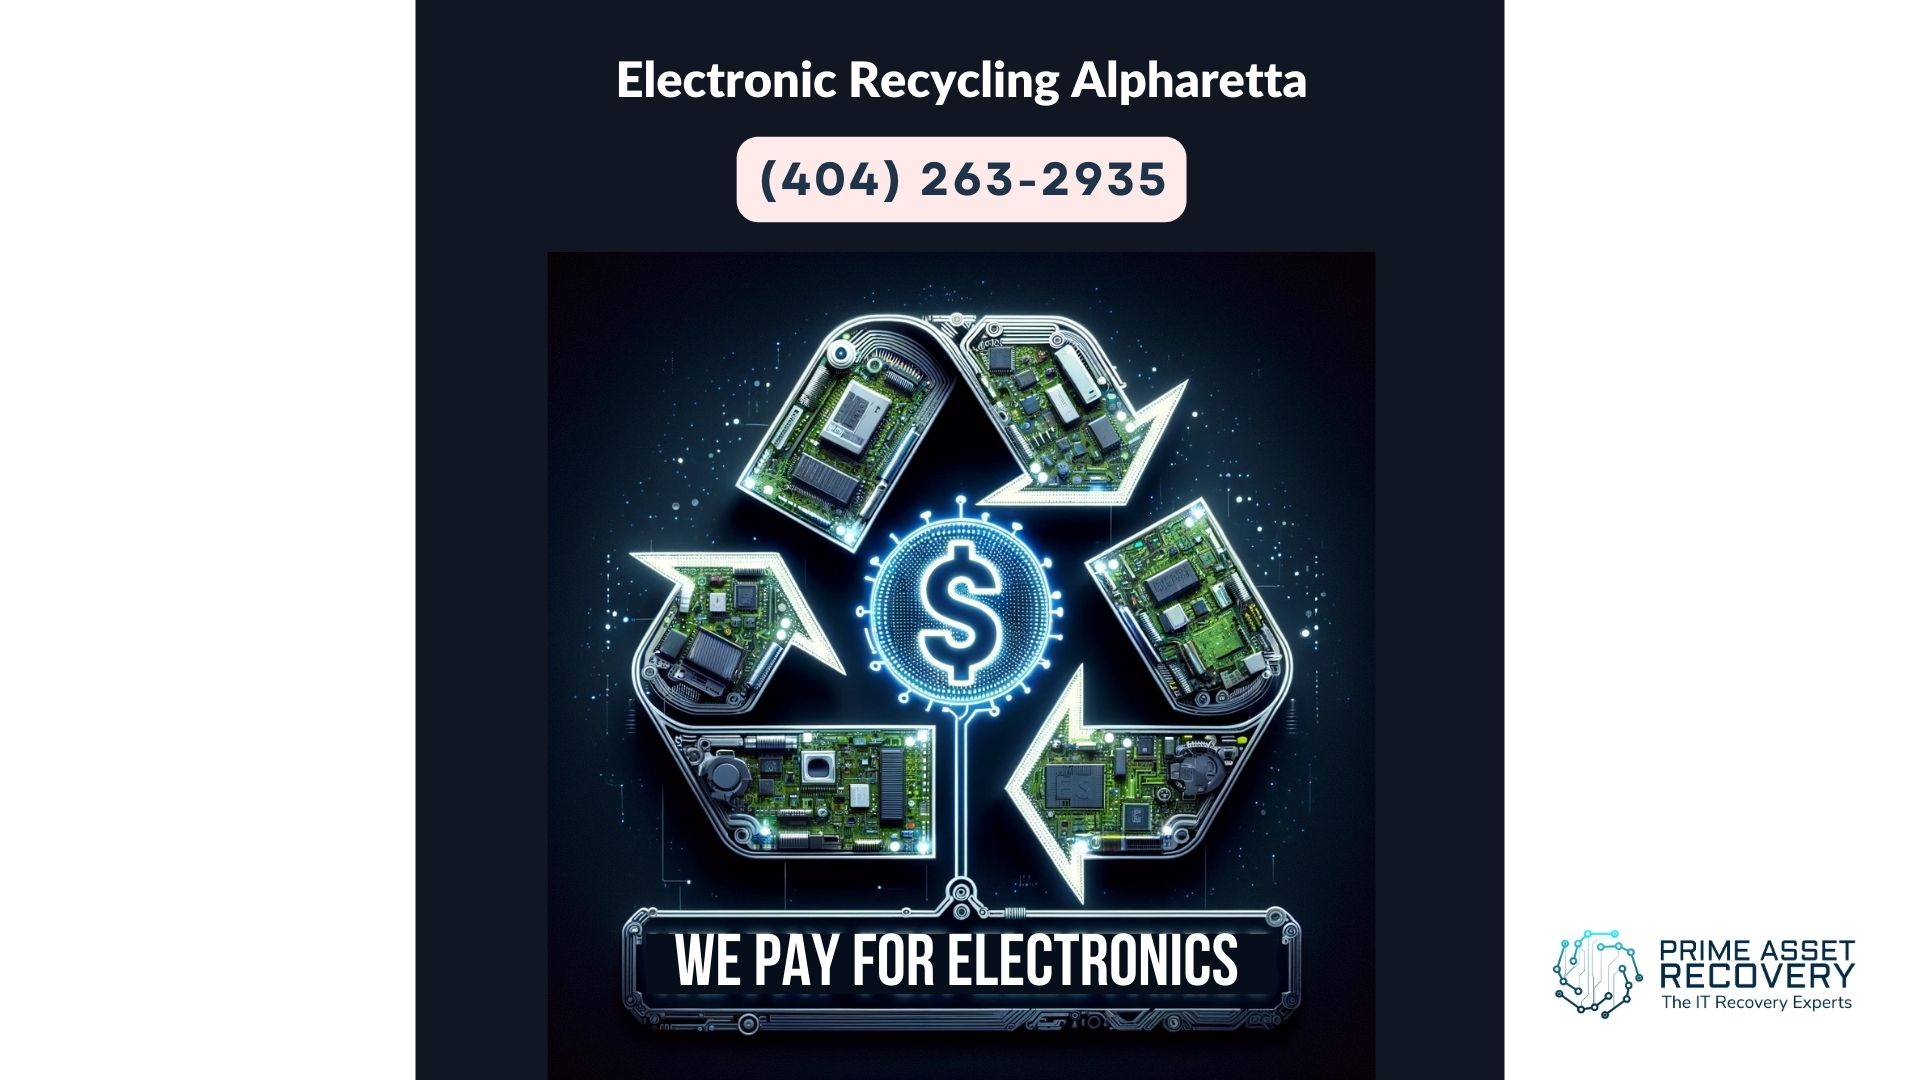 Electronic Recycling Alpharetta - Prime Asset Recovery Your Partner in Responsible Electronics Recycling (1)